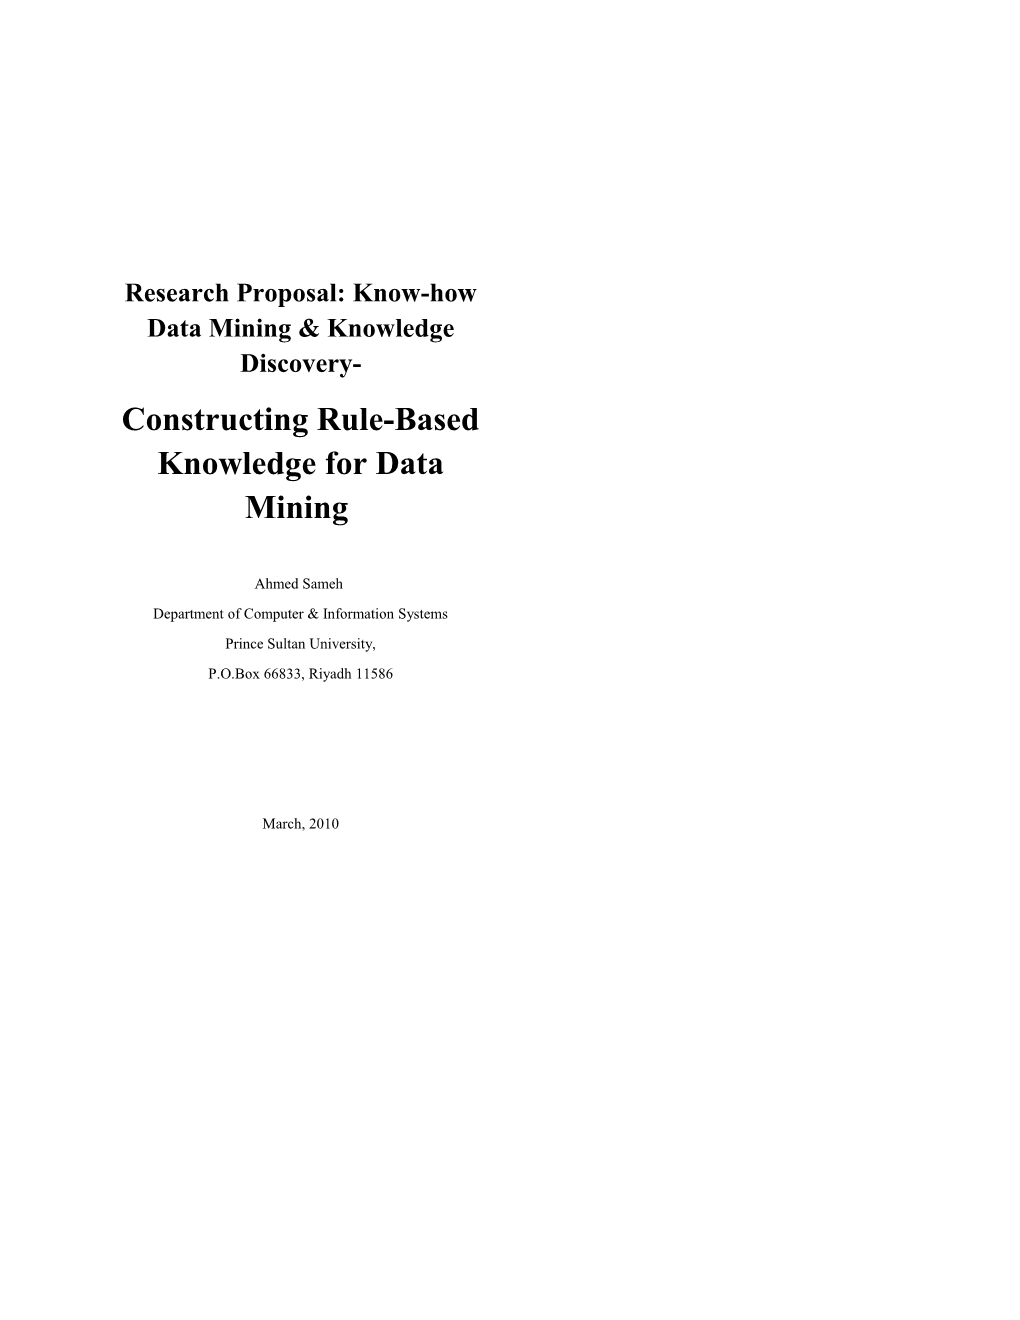 Research Proposal: Know-How Data Mining & Knowledge Discovery